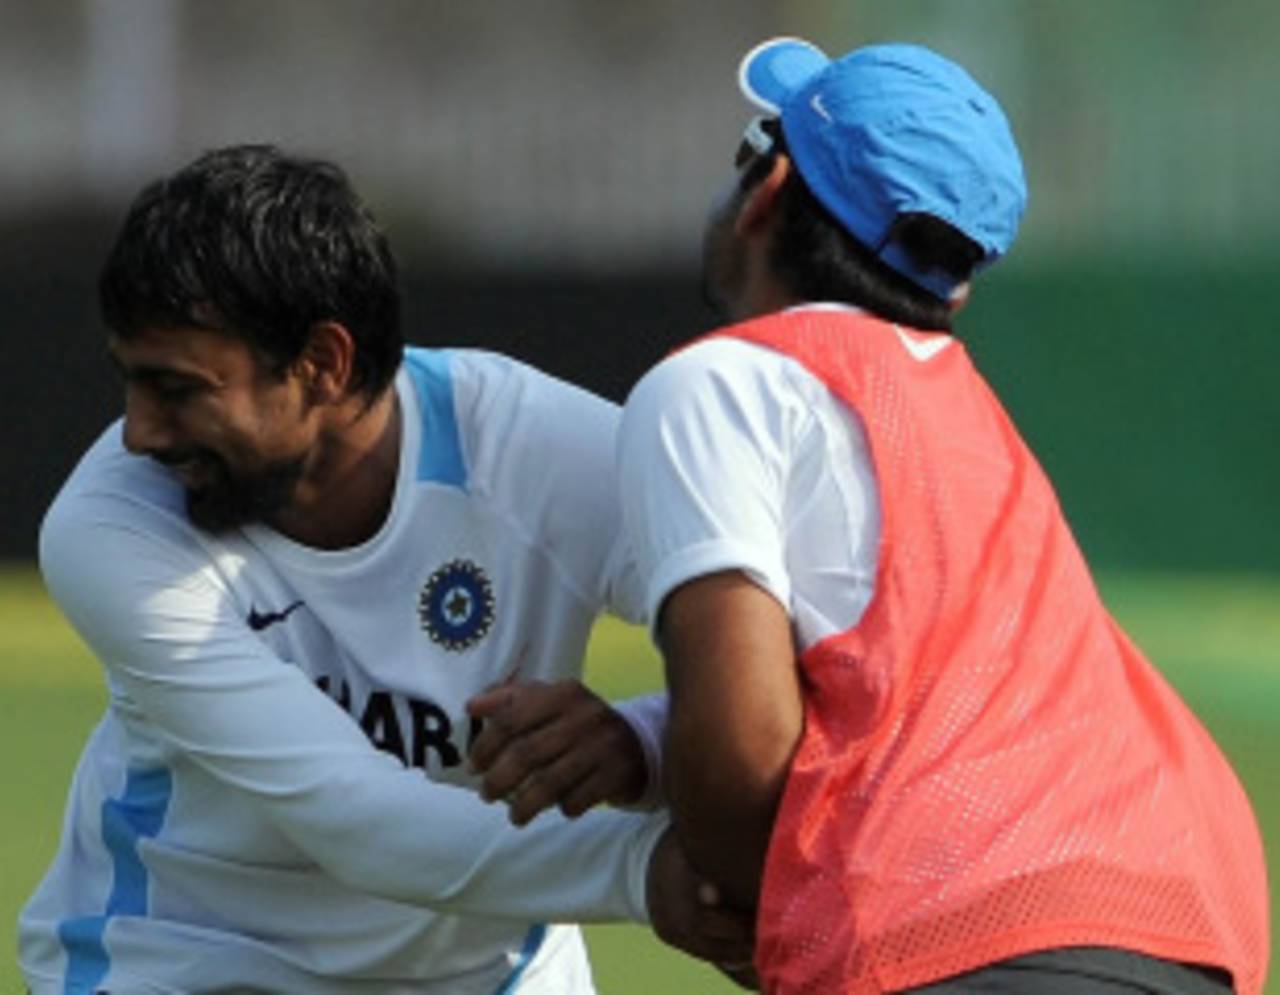 Praveen Kumar and Virat Kohli tussle in jest during a training session ahead of the third ODI against New Zealand, Vadodara, December 3, 2010